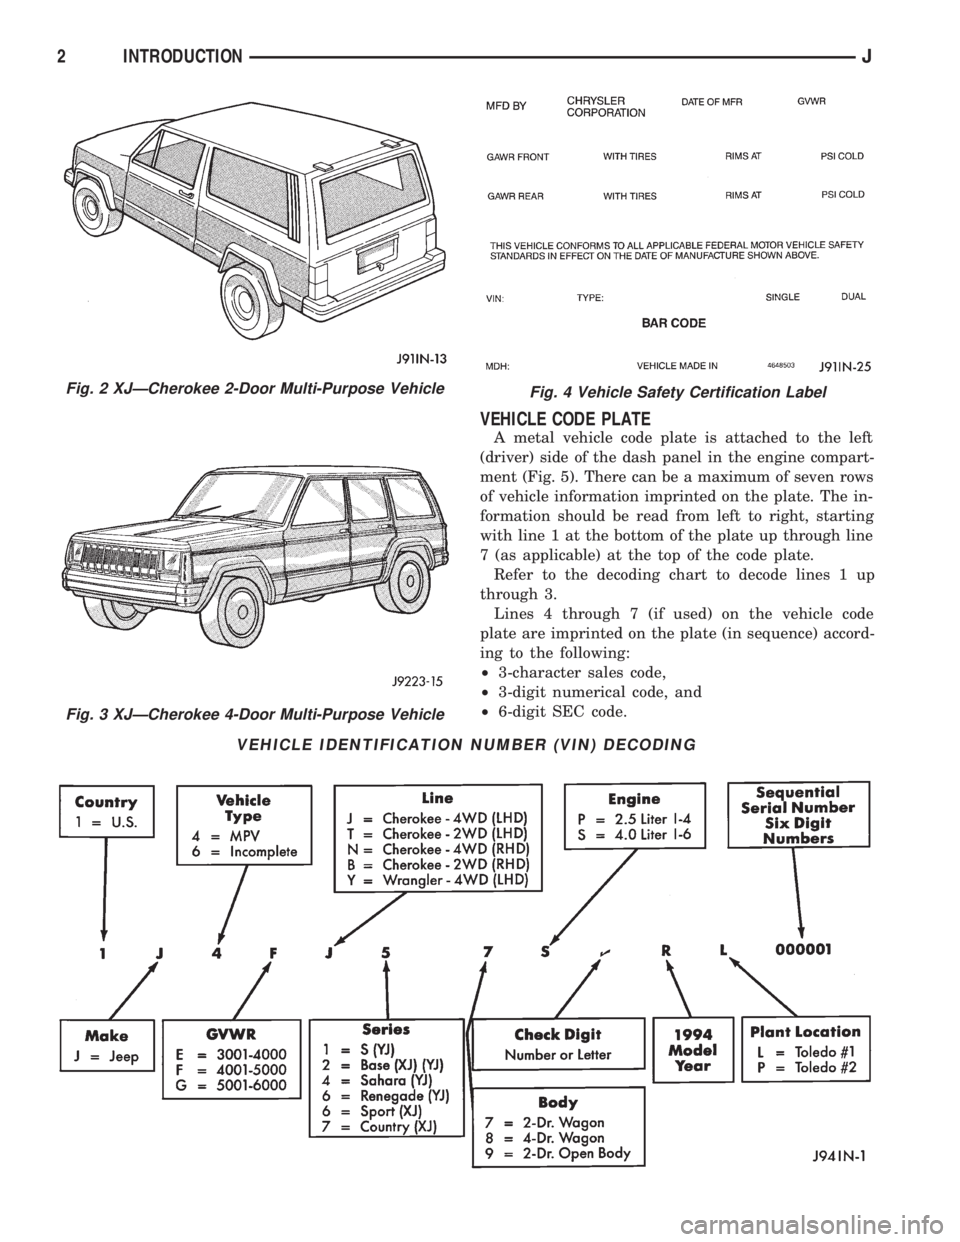 JEEP WRANGLER 1994  Owners Manual Fig. 3 XJÐCherokee 4-Door Multi-Purpose Vehicle
Fig. 4 Vehicle Safety Certification Label
VEHICLE IDENTIFICATION NUMBER (VIN) DECODING 